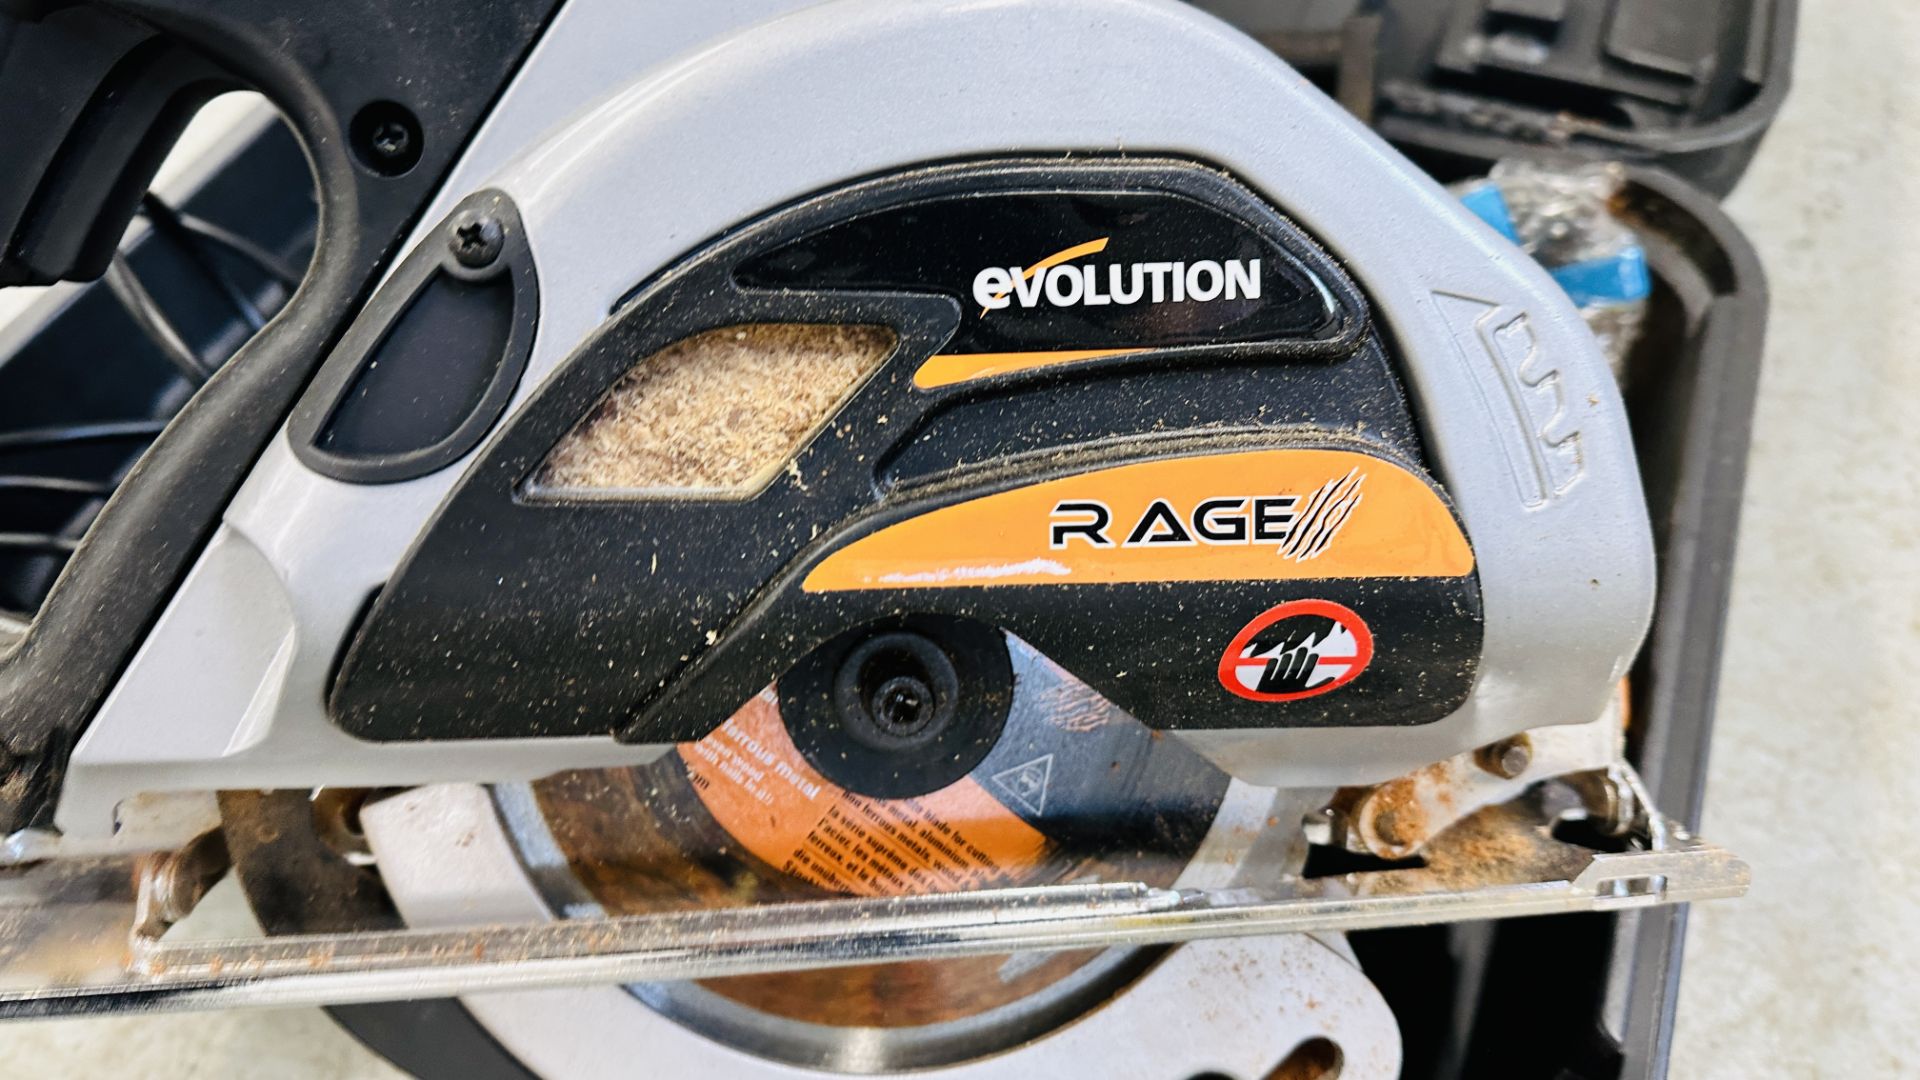 CASED EVOLUTION RAGE CIRCULAR SAW - SOLD AS SEEN. - Image 3 of 6